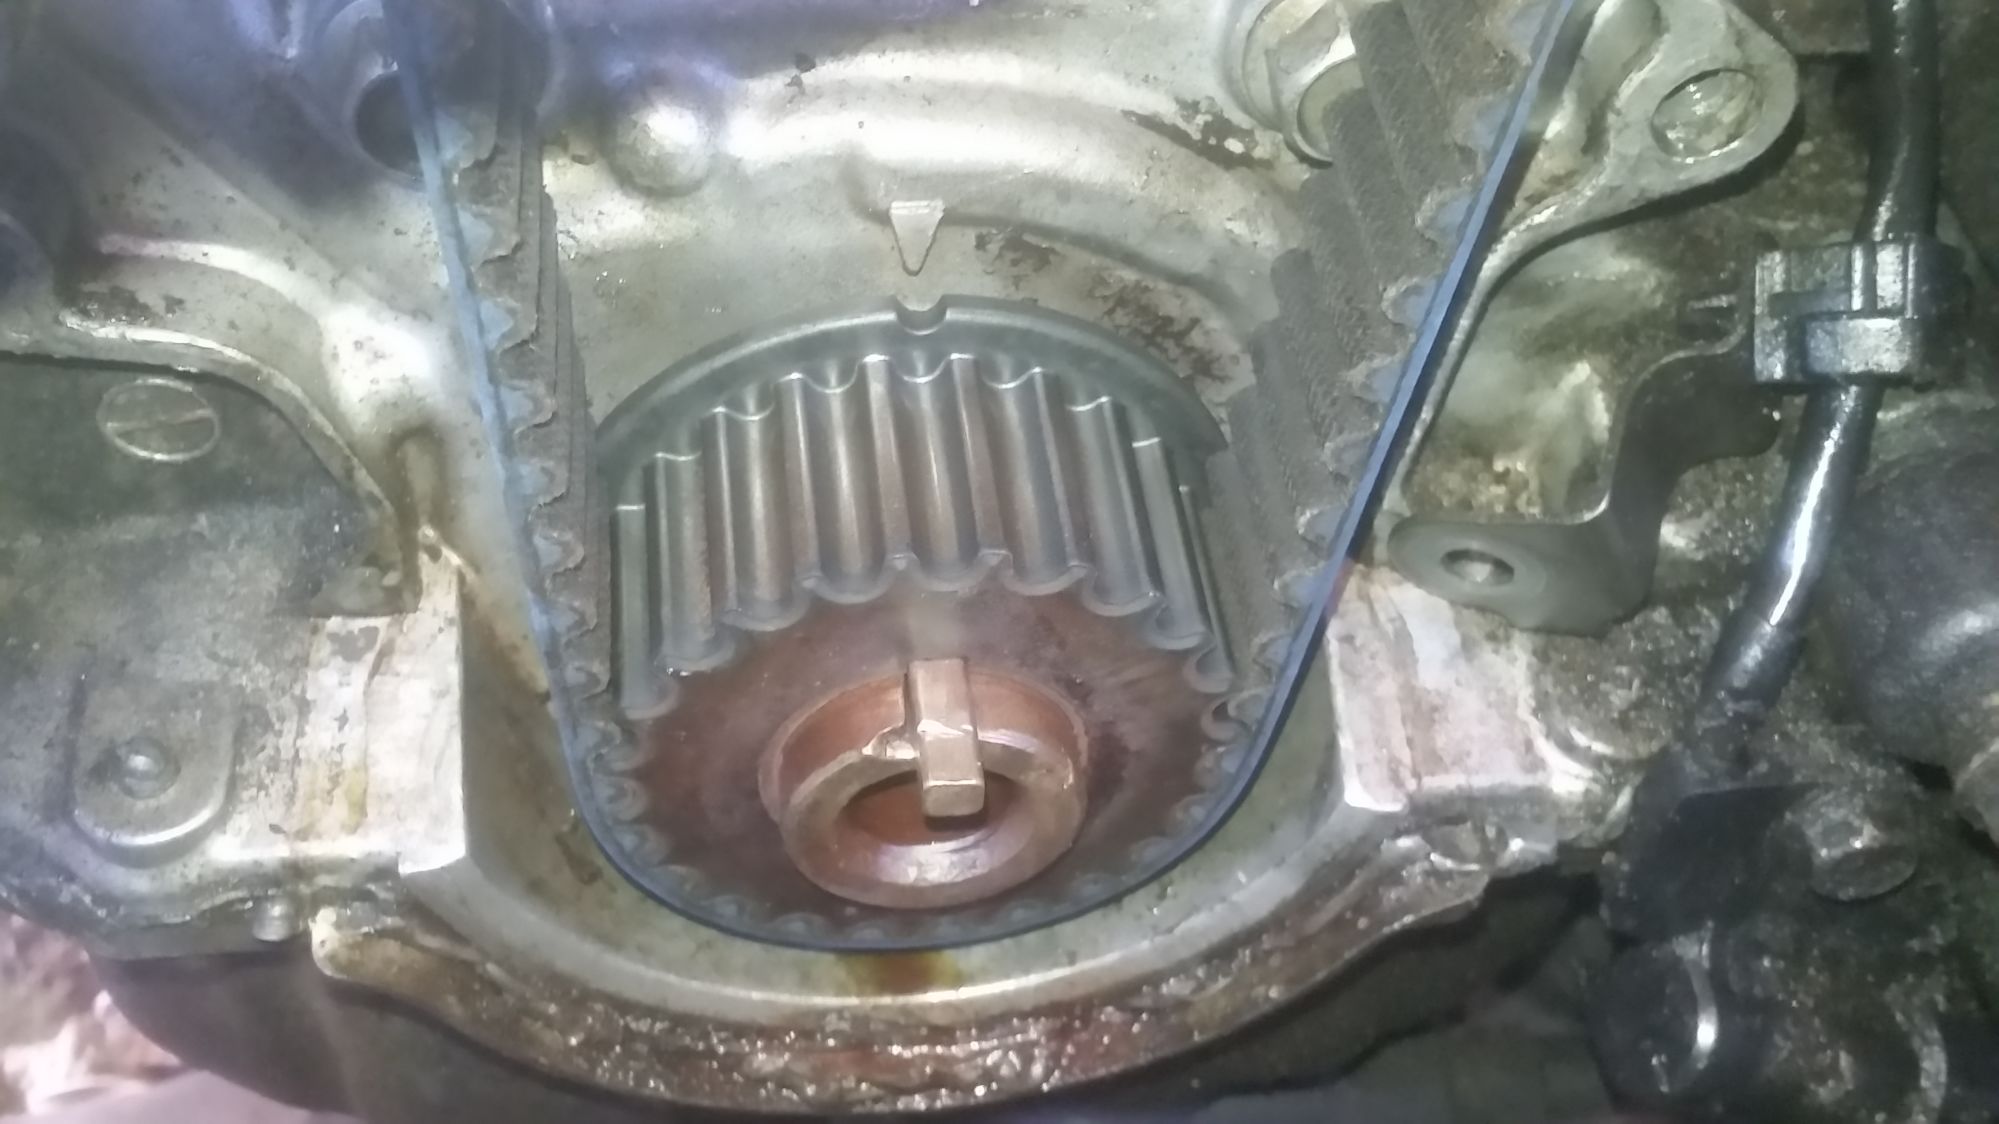 Two timing marks 01+ engine - Miata Turbo Forum - Boost cars